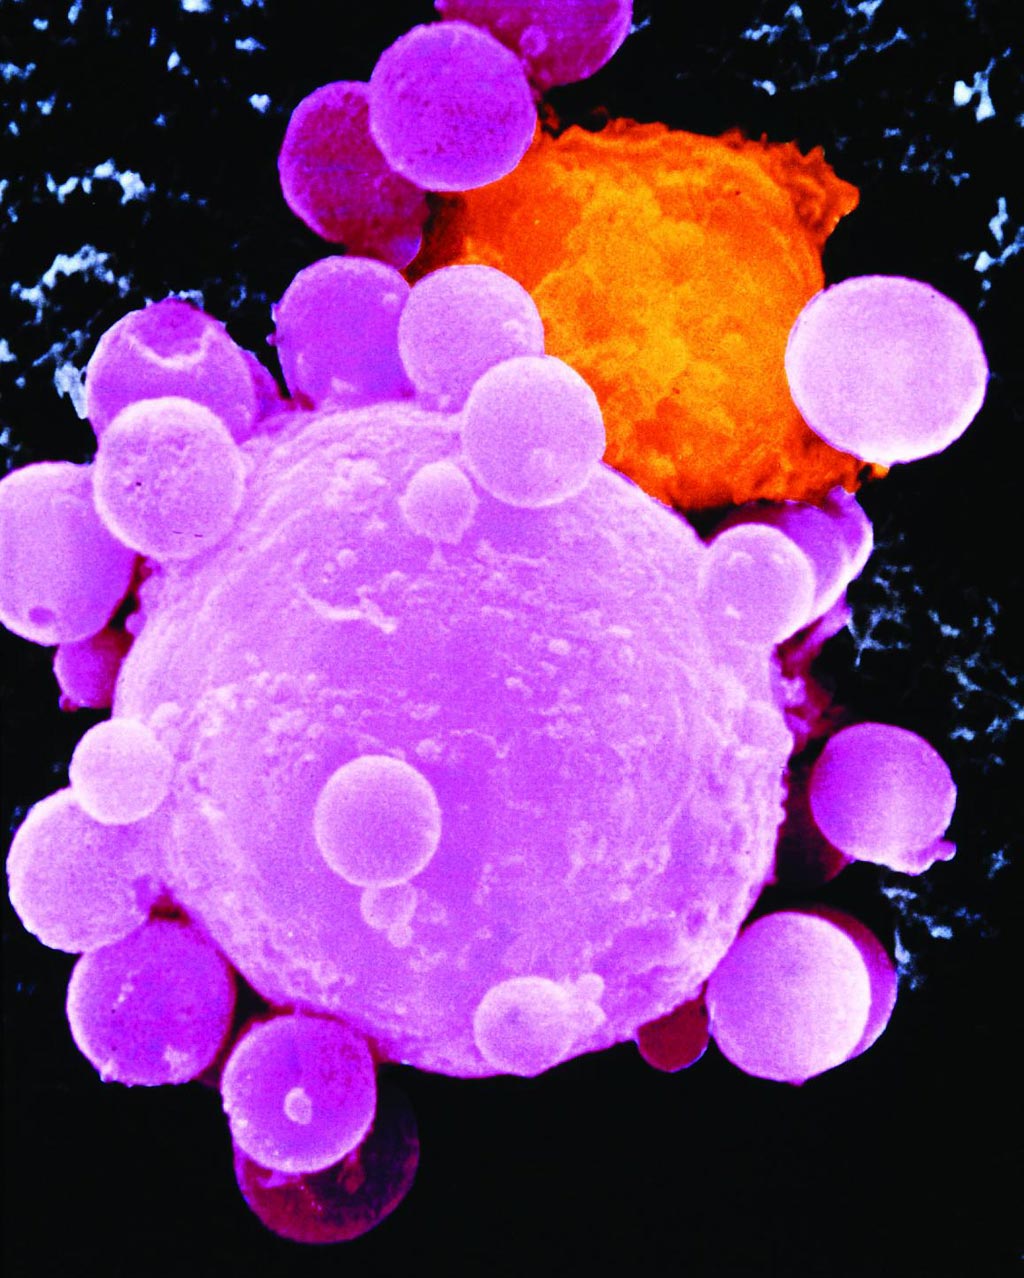 Image: A colored scanning electron micrograph (SEM) of a lung cancer cell during cell division (Photo courtesy of the National Institutes of Health).